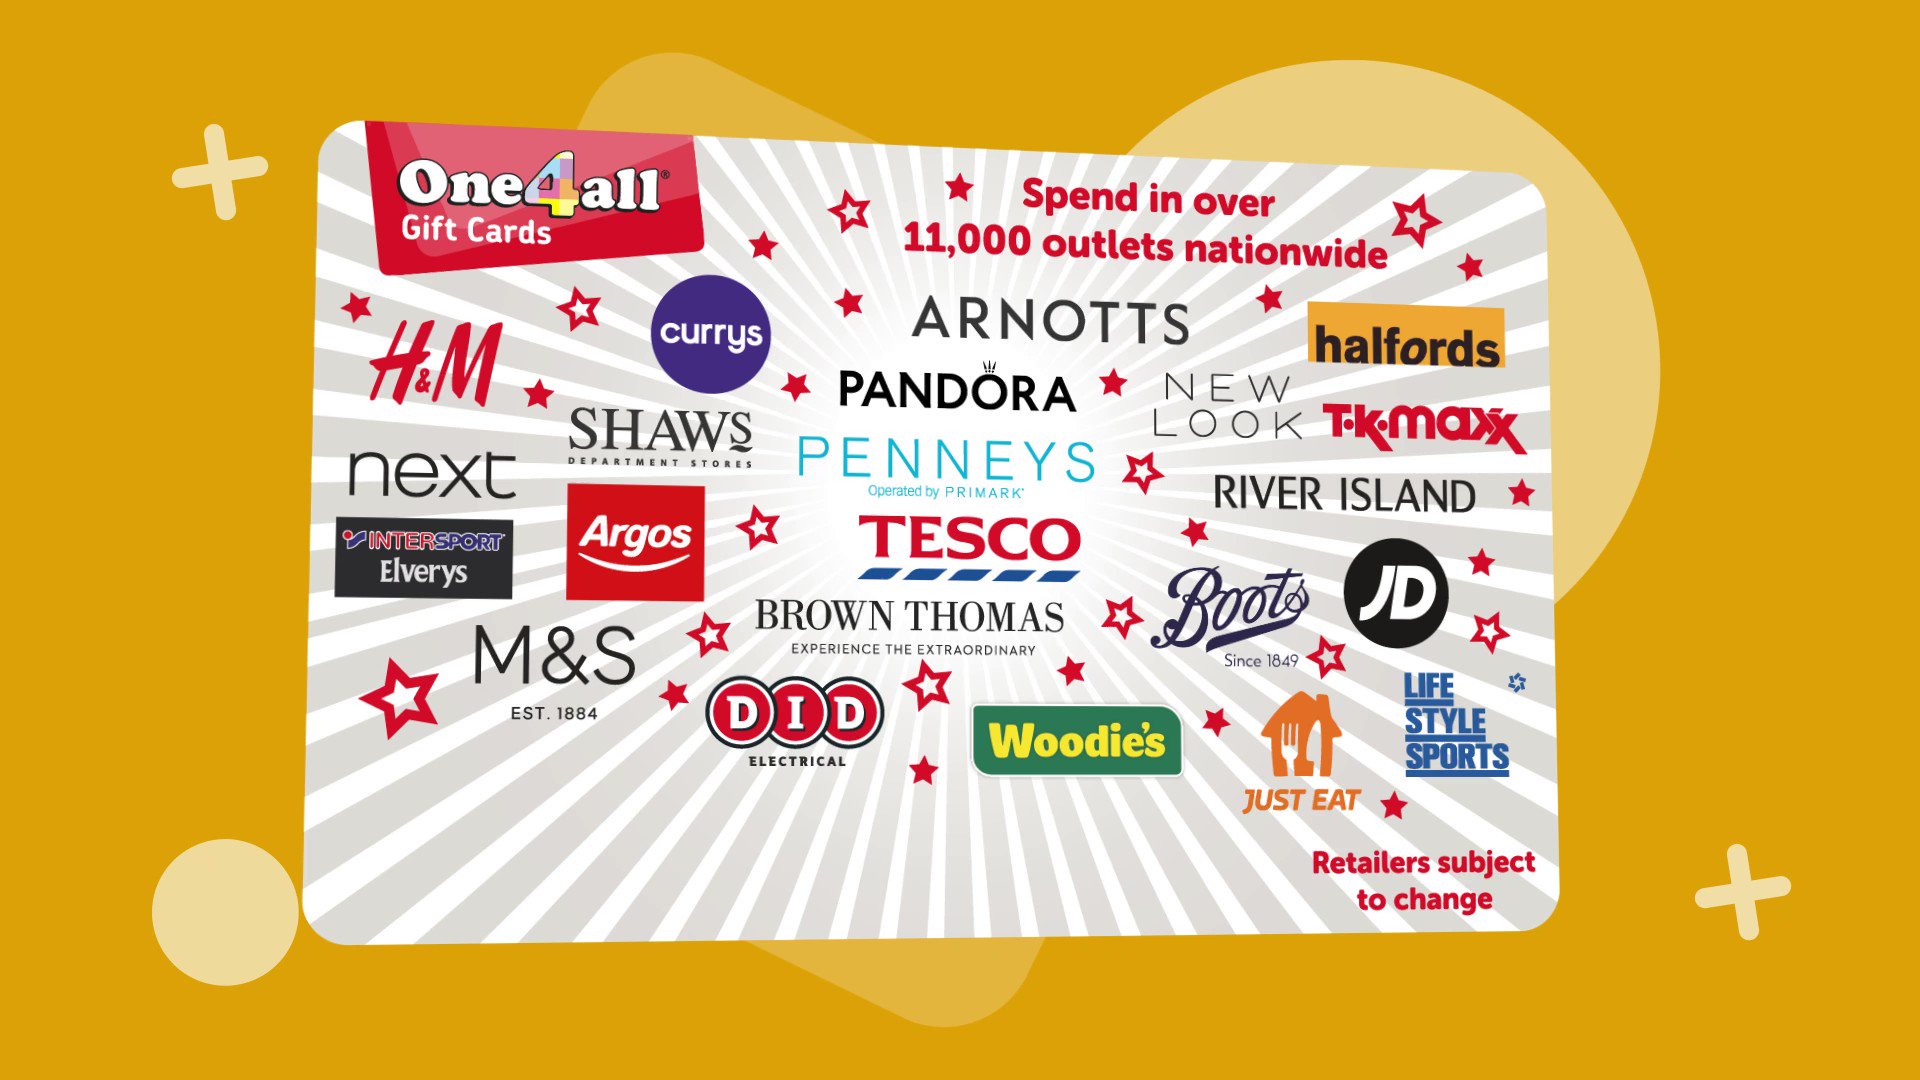 “Save Money at Tesco with One4All Vouchers – Here’s How!” Does Tesco Take One4All Vouchers